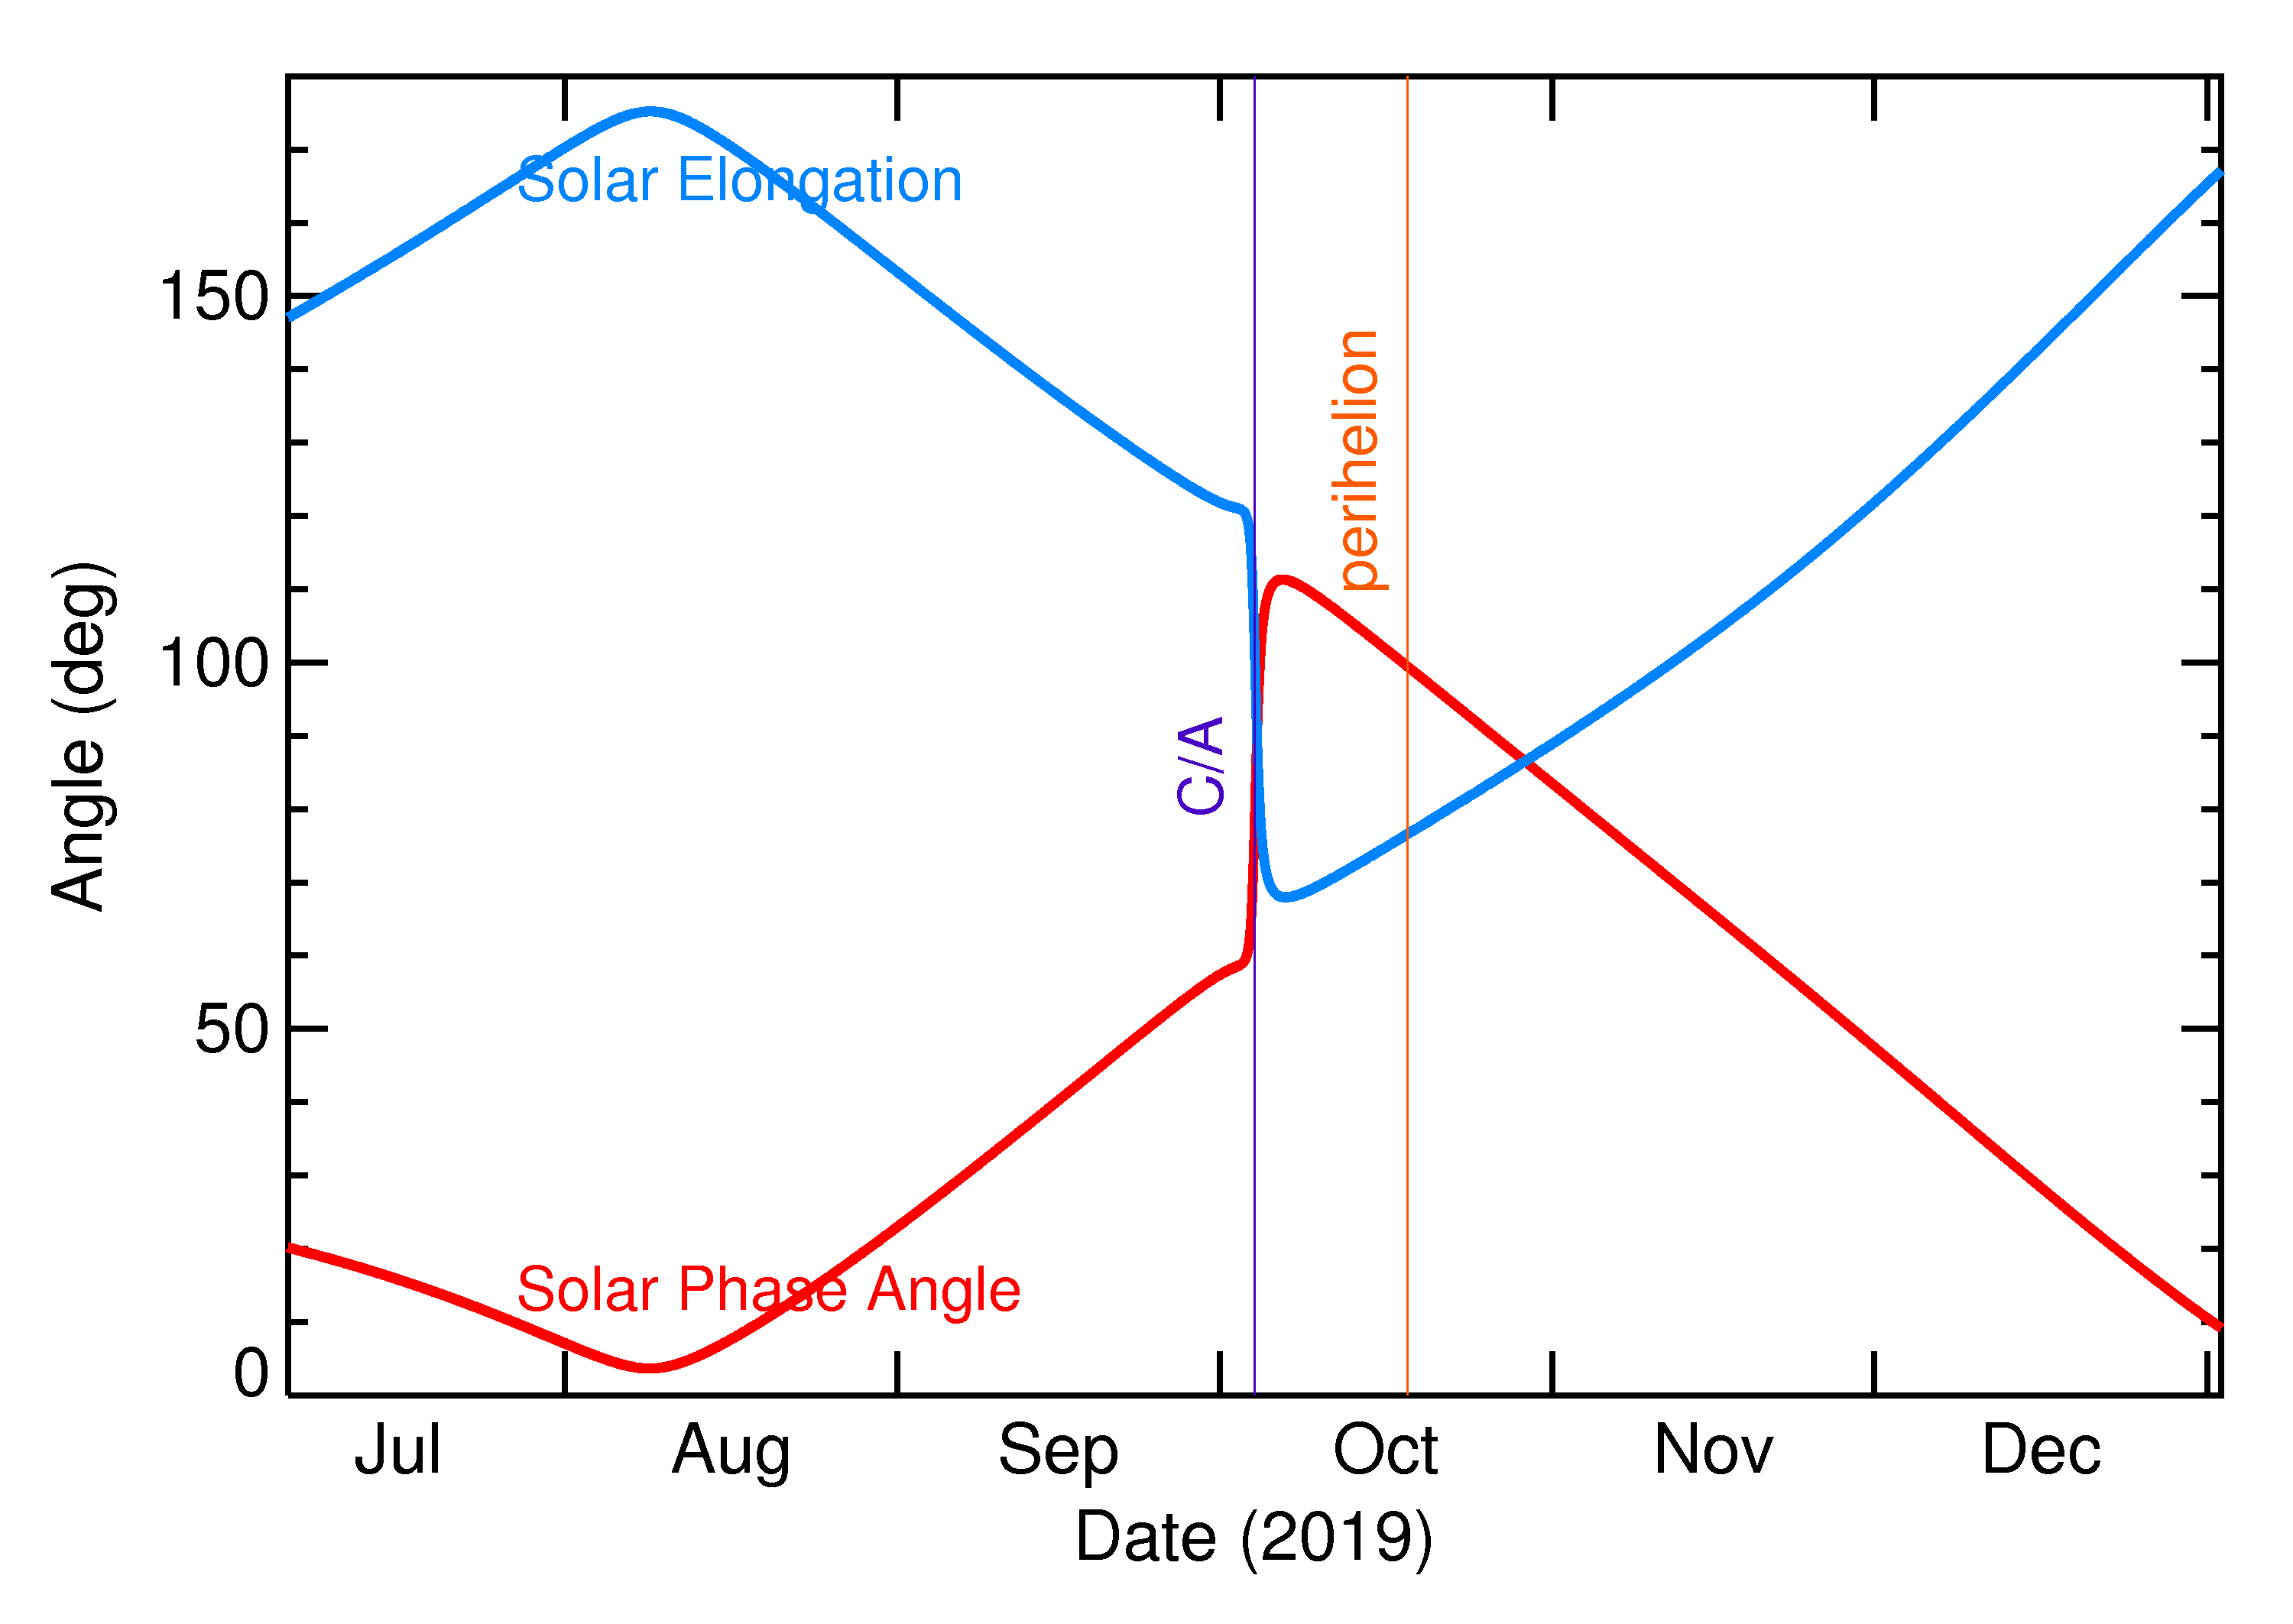 Solar Elongation and Solar Phase Angle of 2019 SP3 in the months around closest approach